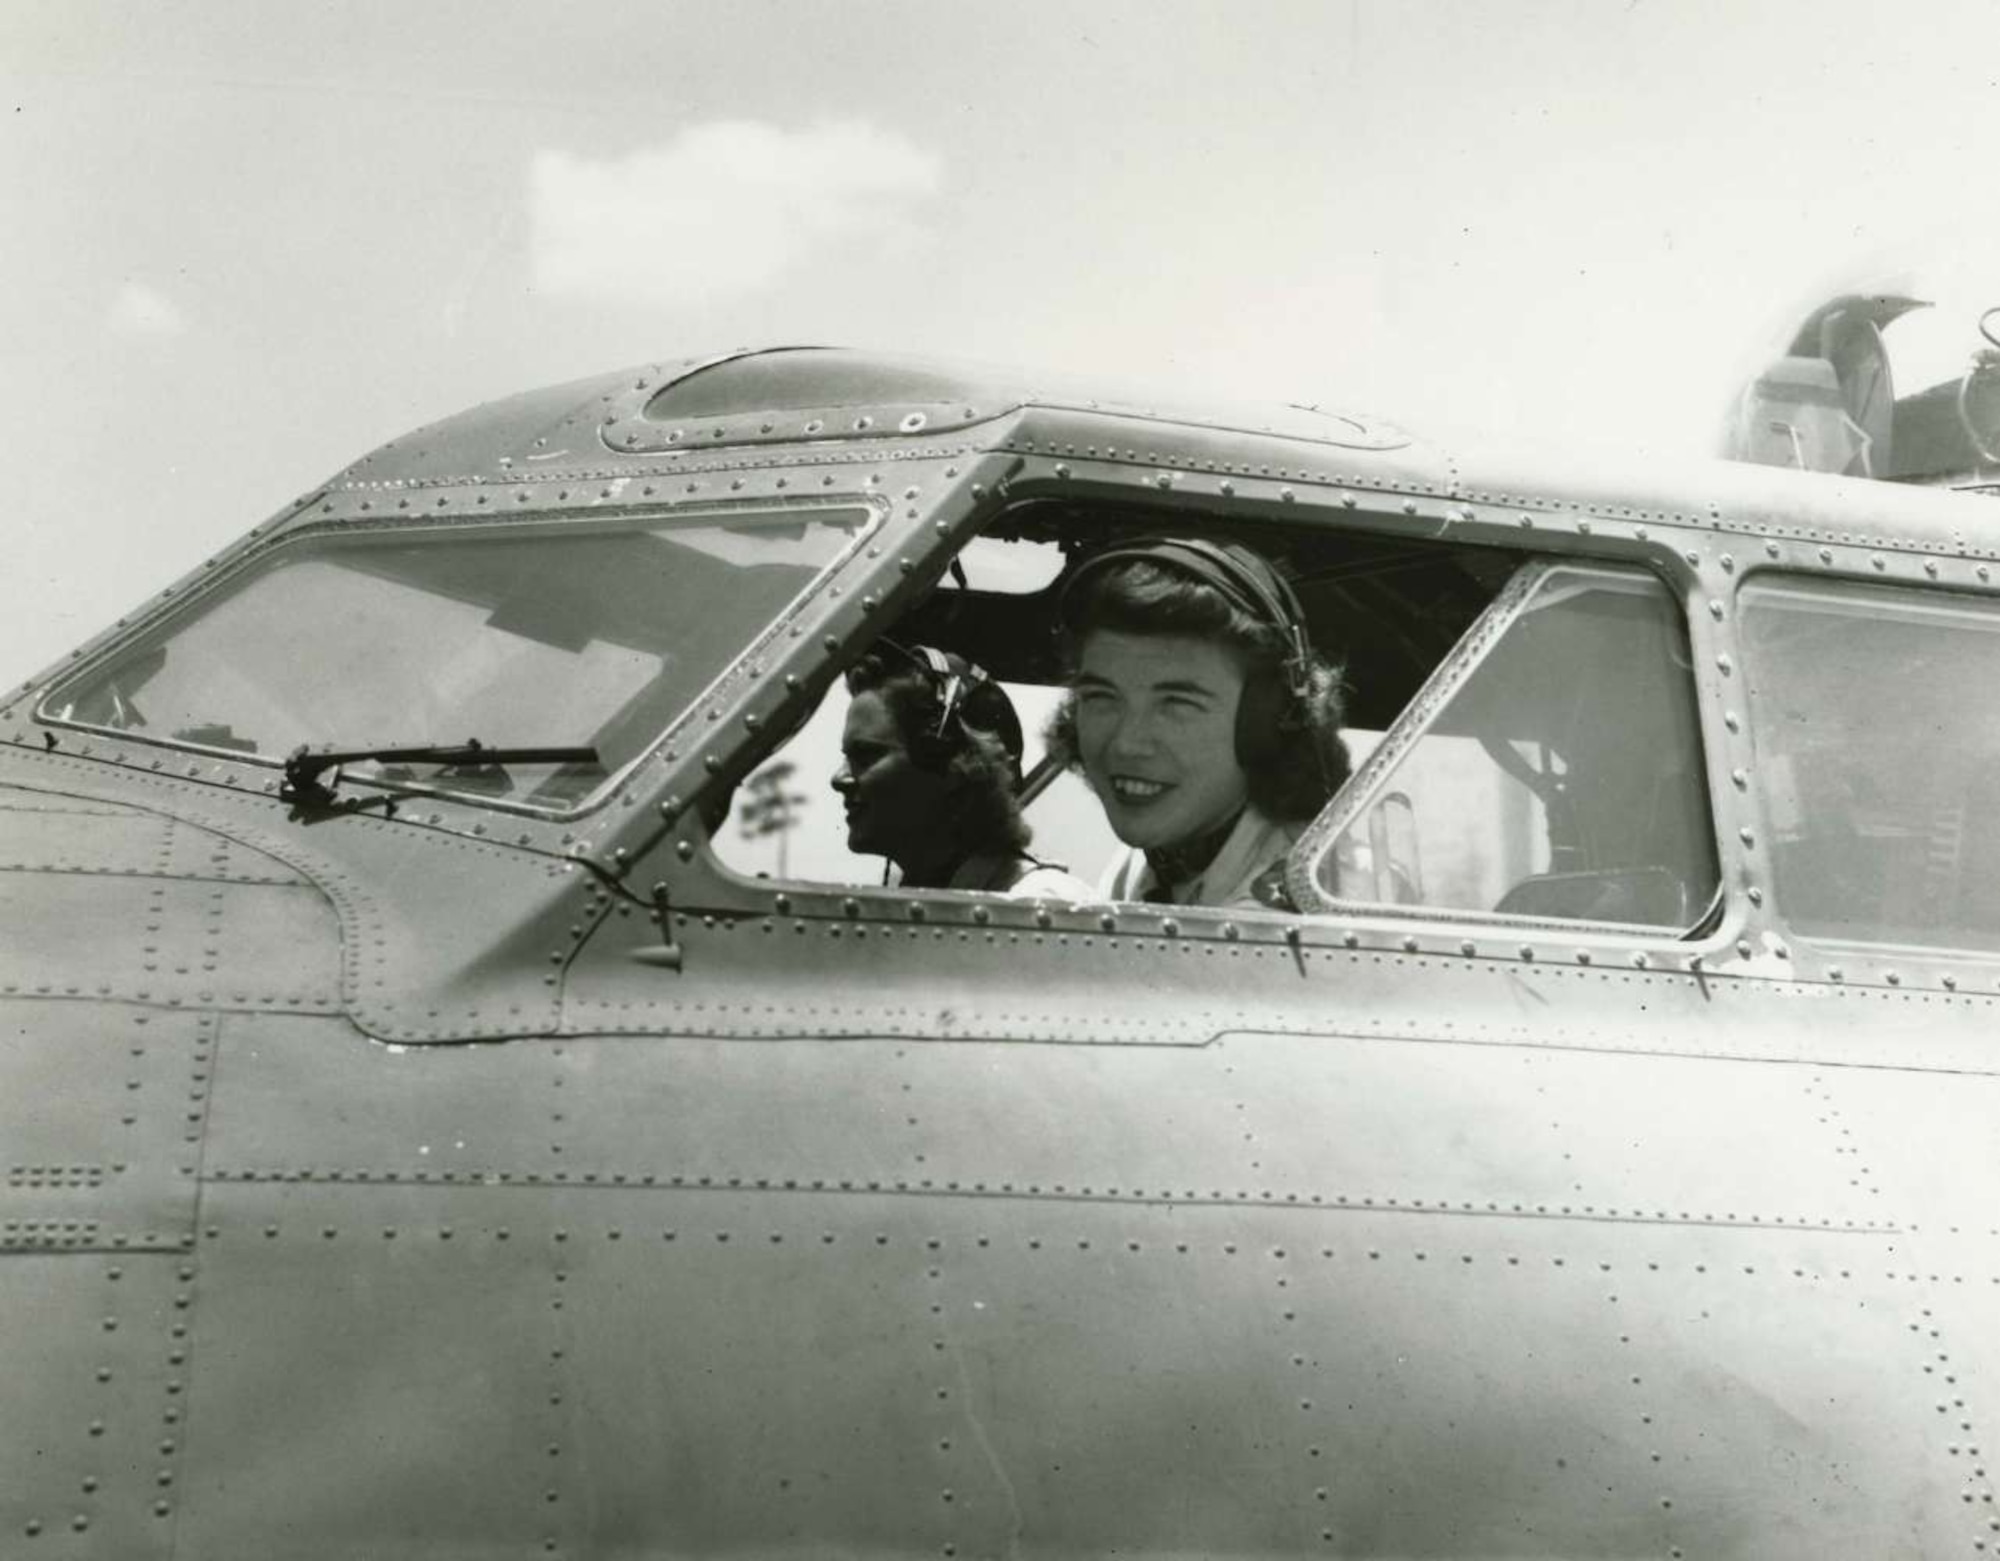 Dawn Seymour looks out the cockpit window of a B-17 Bomber during a World War II training mission. Mrs. Seymour was one of five 2009 inductees into the Women In Aviation History, Internationational Pioneer Hall of Fame. She was one of 13 women qualified to fly the giant bombers during the war. Two officers representing the 931st Air Refueling Group, Maj. Leah Schmidt and Capt. Gia Witmer, witnessed the hall of fame induction ceremony at a Women in Aviation Conference in Atlanta, Ga. (Courtesy photo)